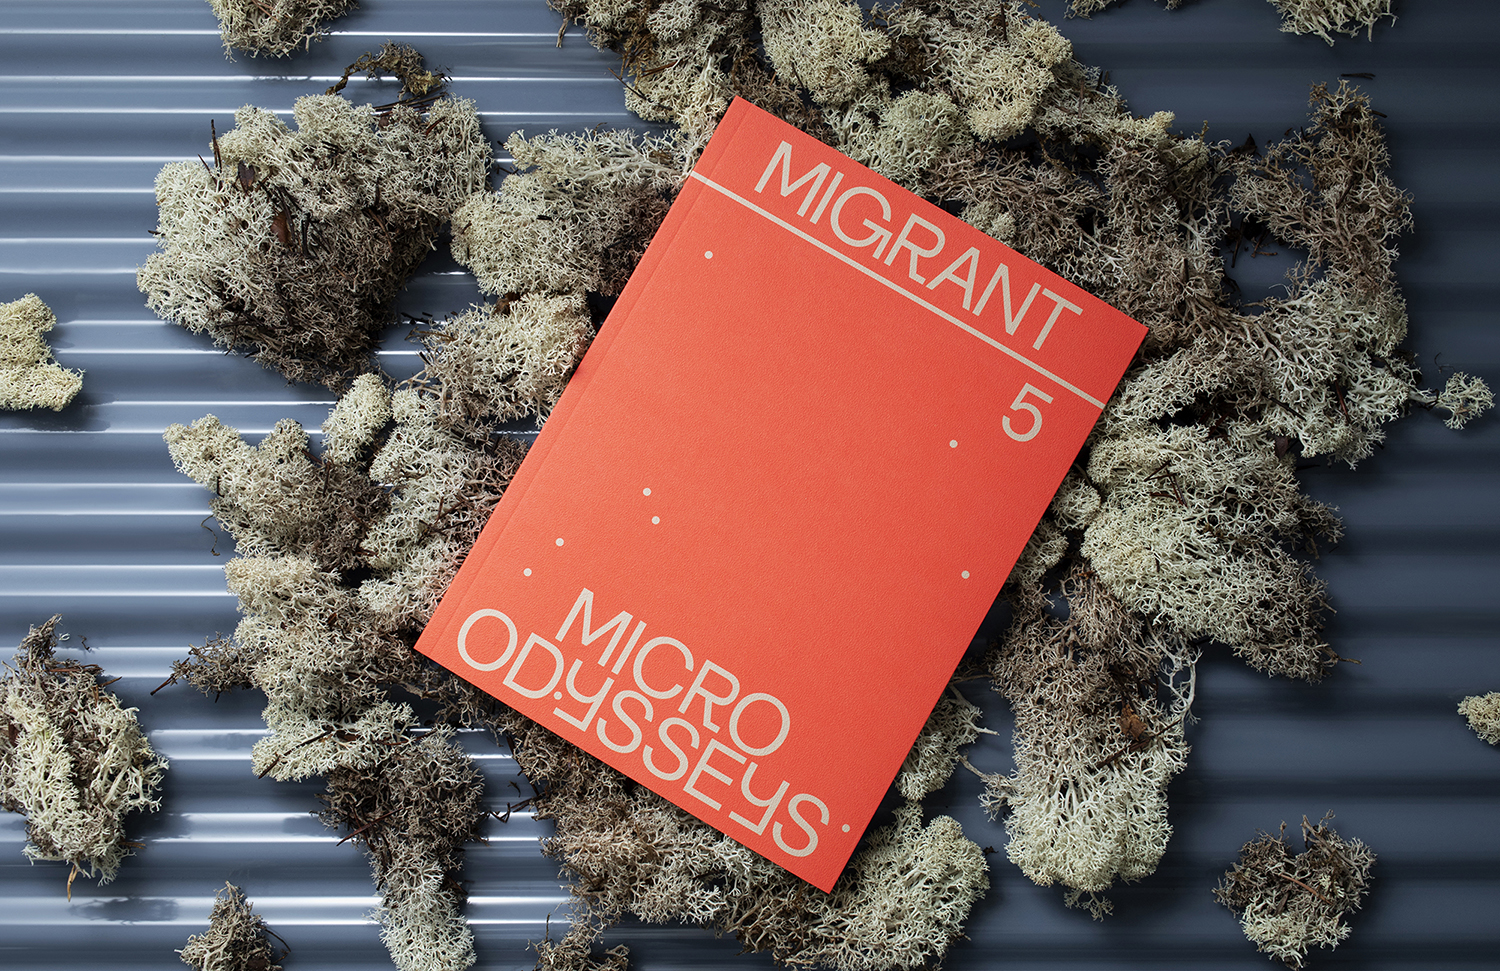 The Best of BP&O November 2018 – Migrant Journal No.5 by Offshore Studio